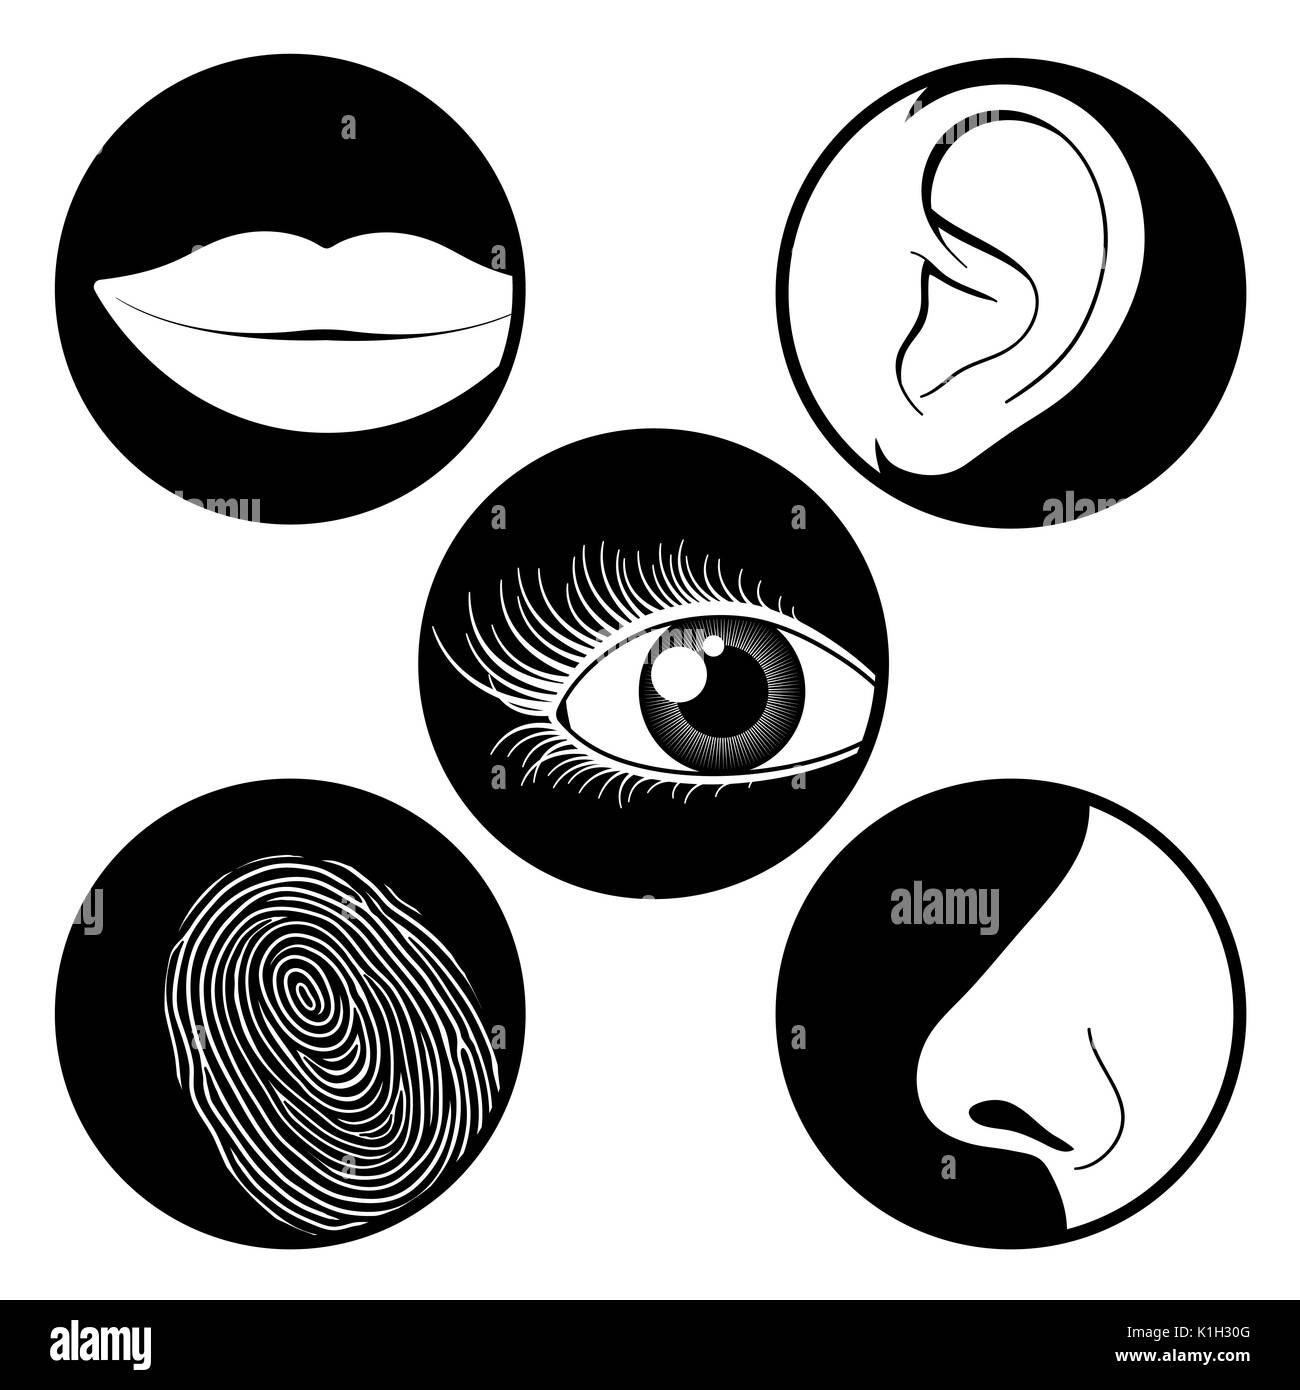 5 senses collection: smell, touch, hearing, taste and sight - illustration set Stock Vector